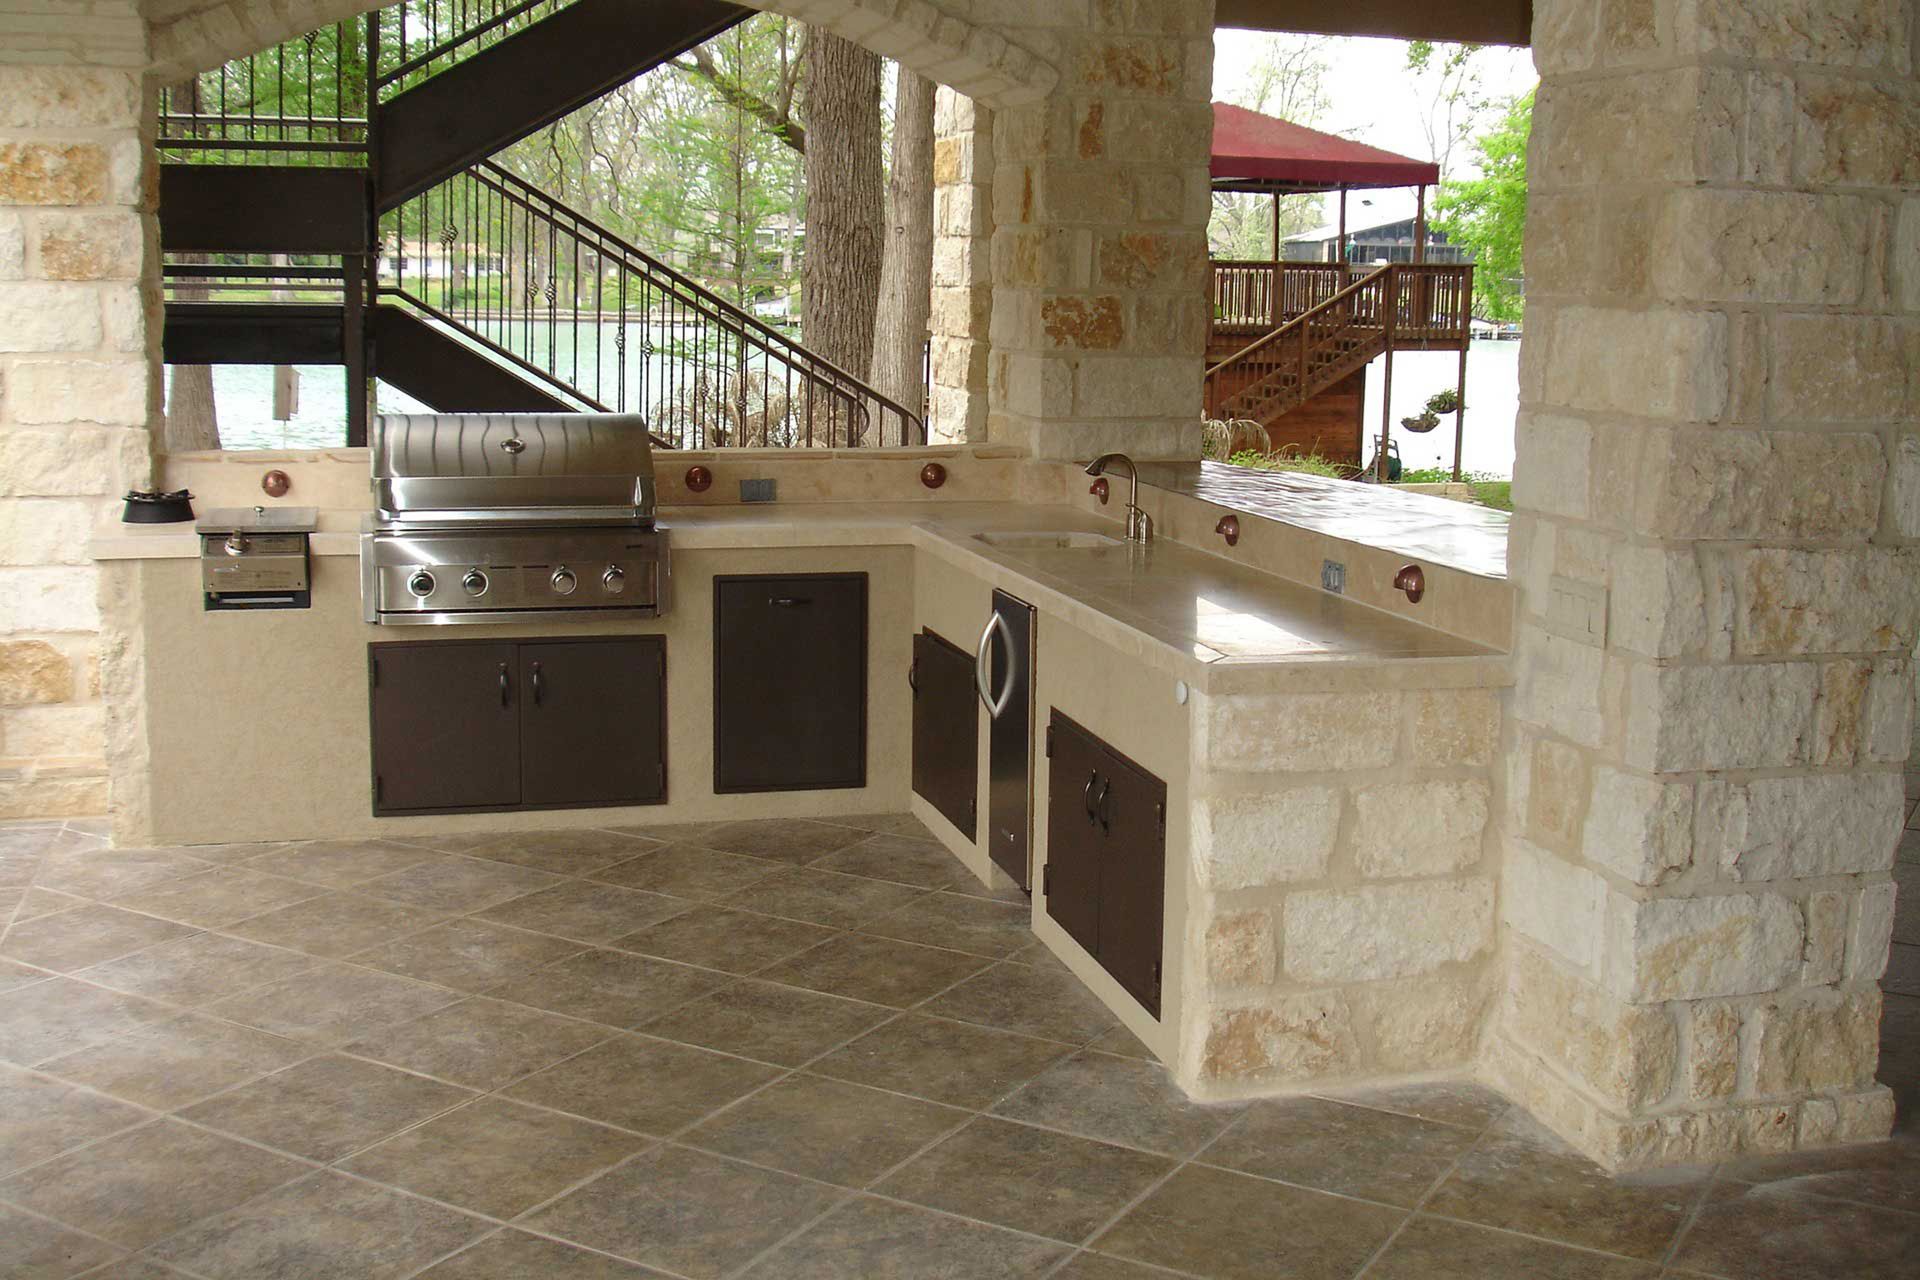 Custom outdoor kitchen in a covered pavers patio